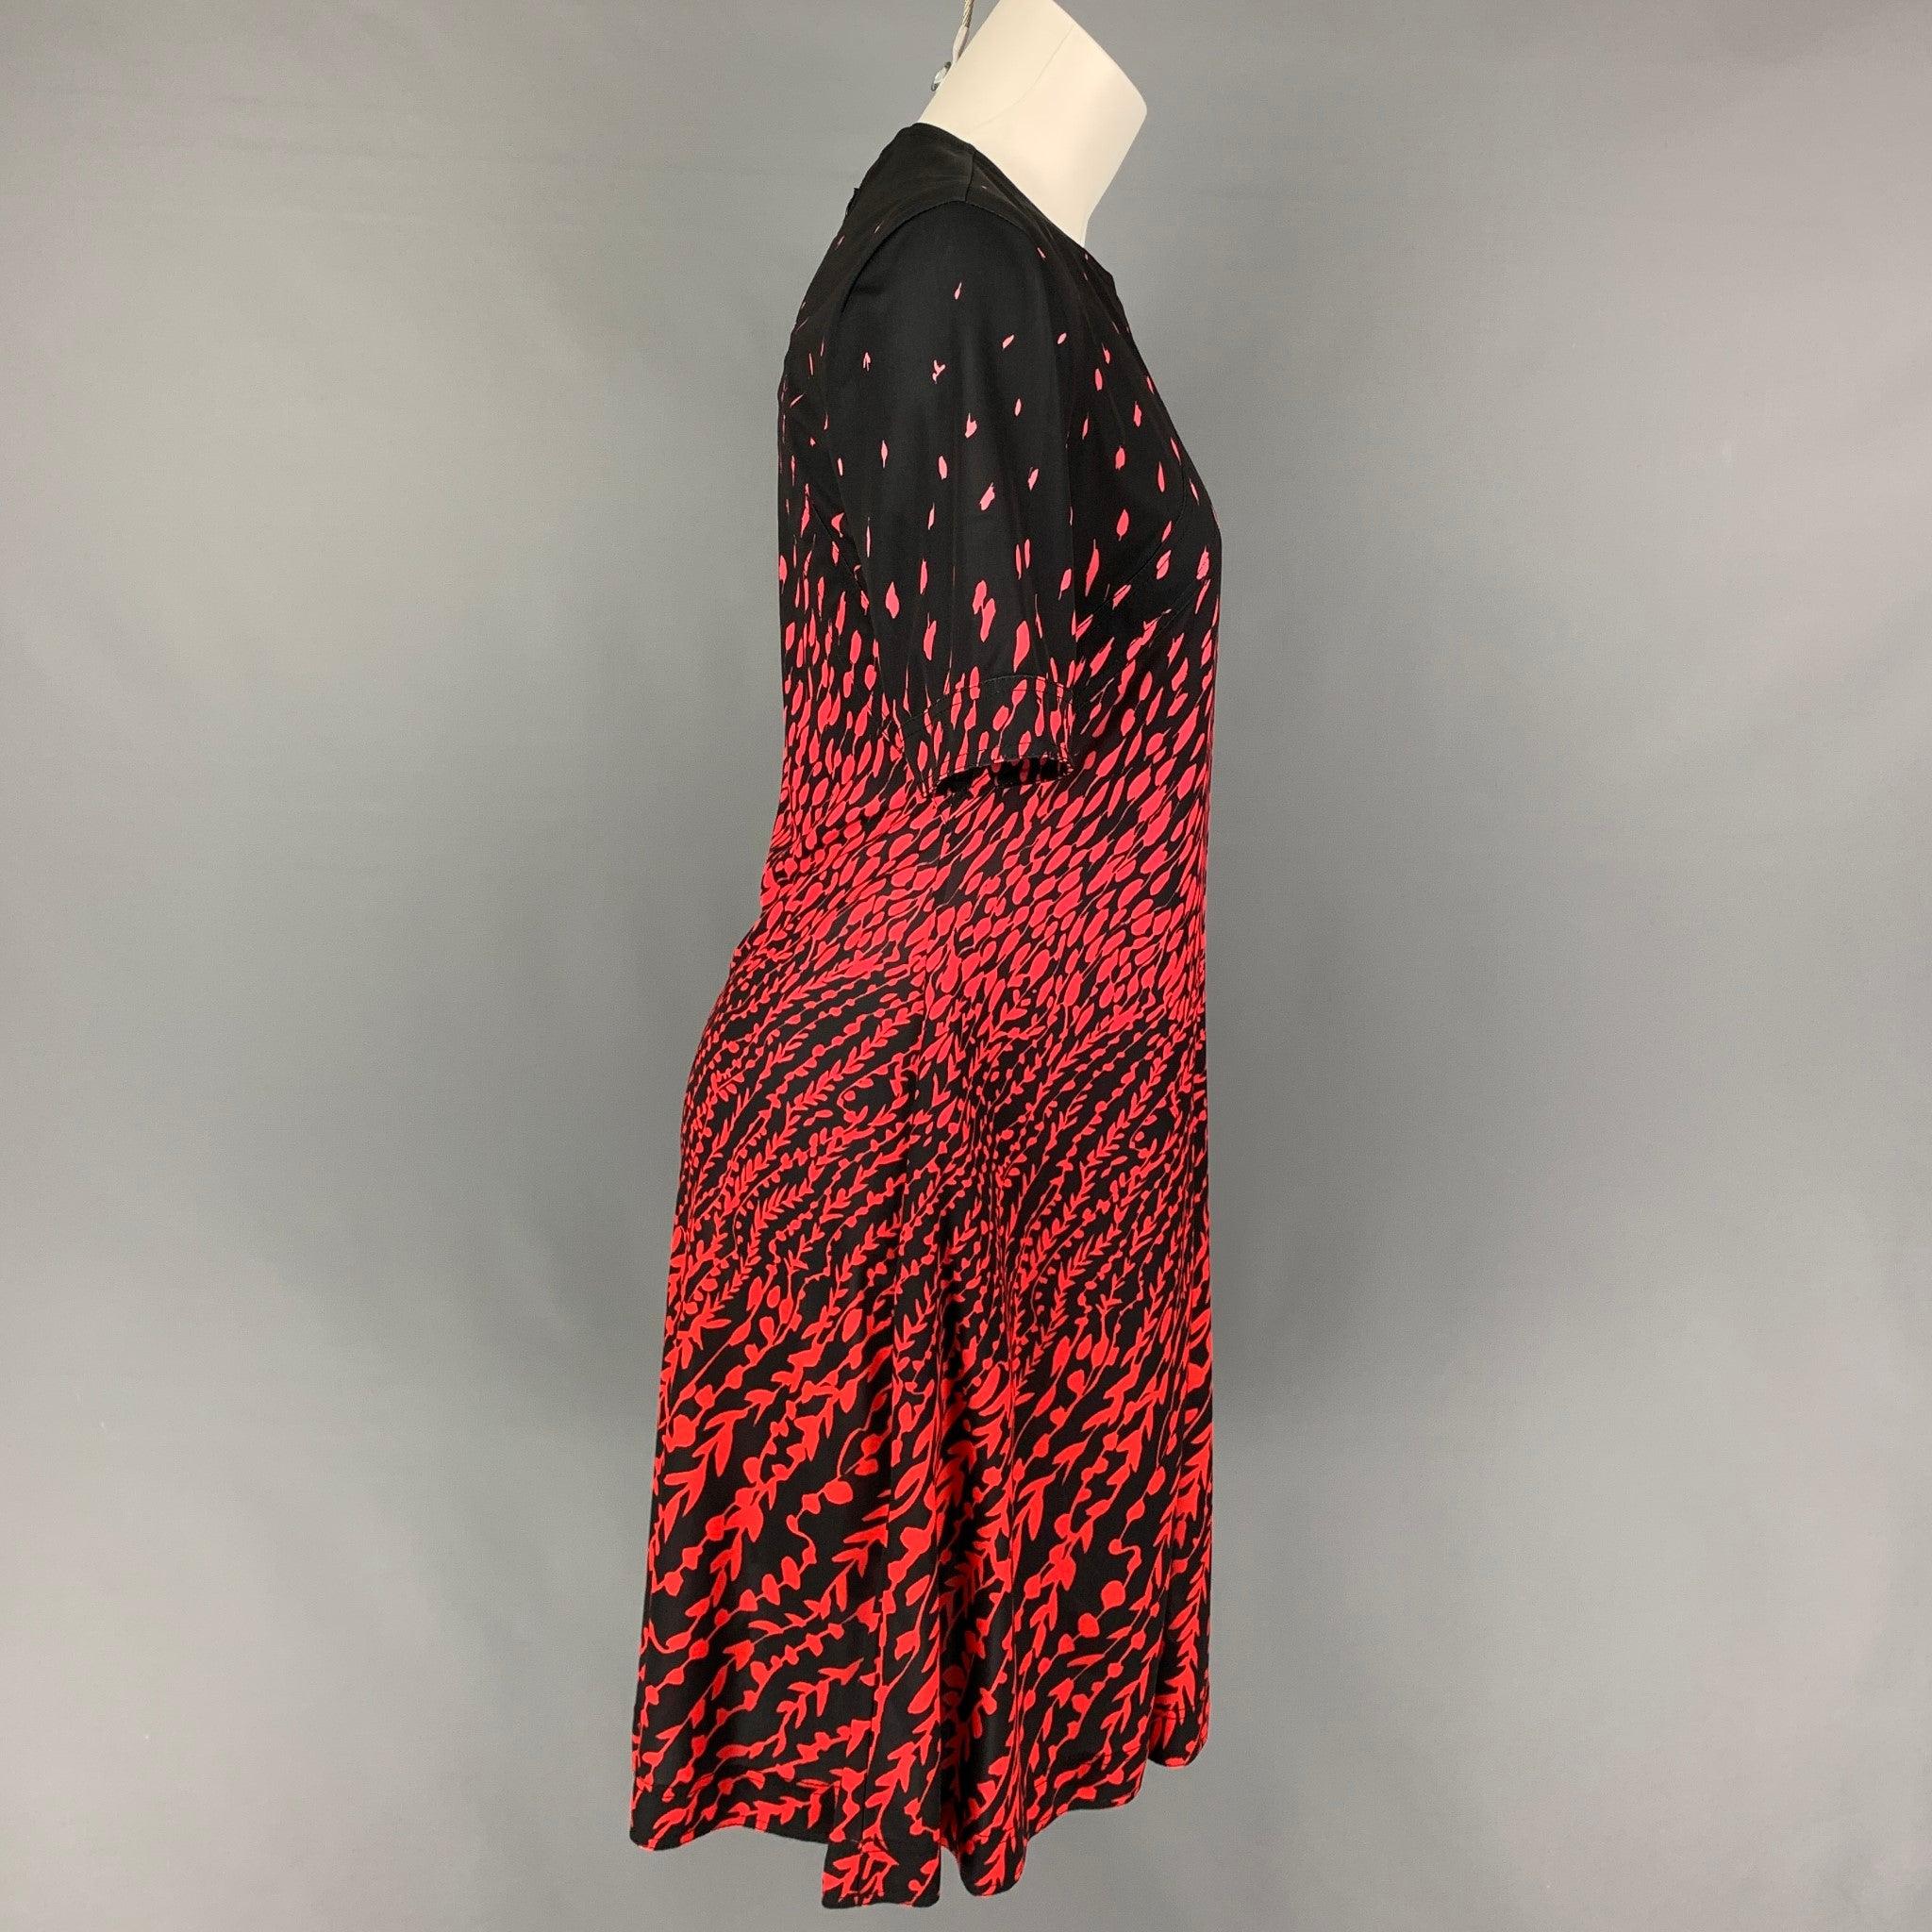 GIVENCHY dress comes in a black & red abstract polyester featuring a shift style, short sleeves, and a back zip up closure. Made in Italy. Very Good
Pre-Owned Condition. 

Marked:   42 

Measurements: 
 
Shoulder: 15.5 inches  Bust: 35 inches 